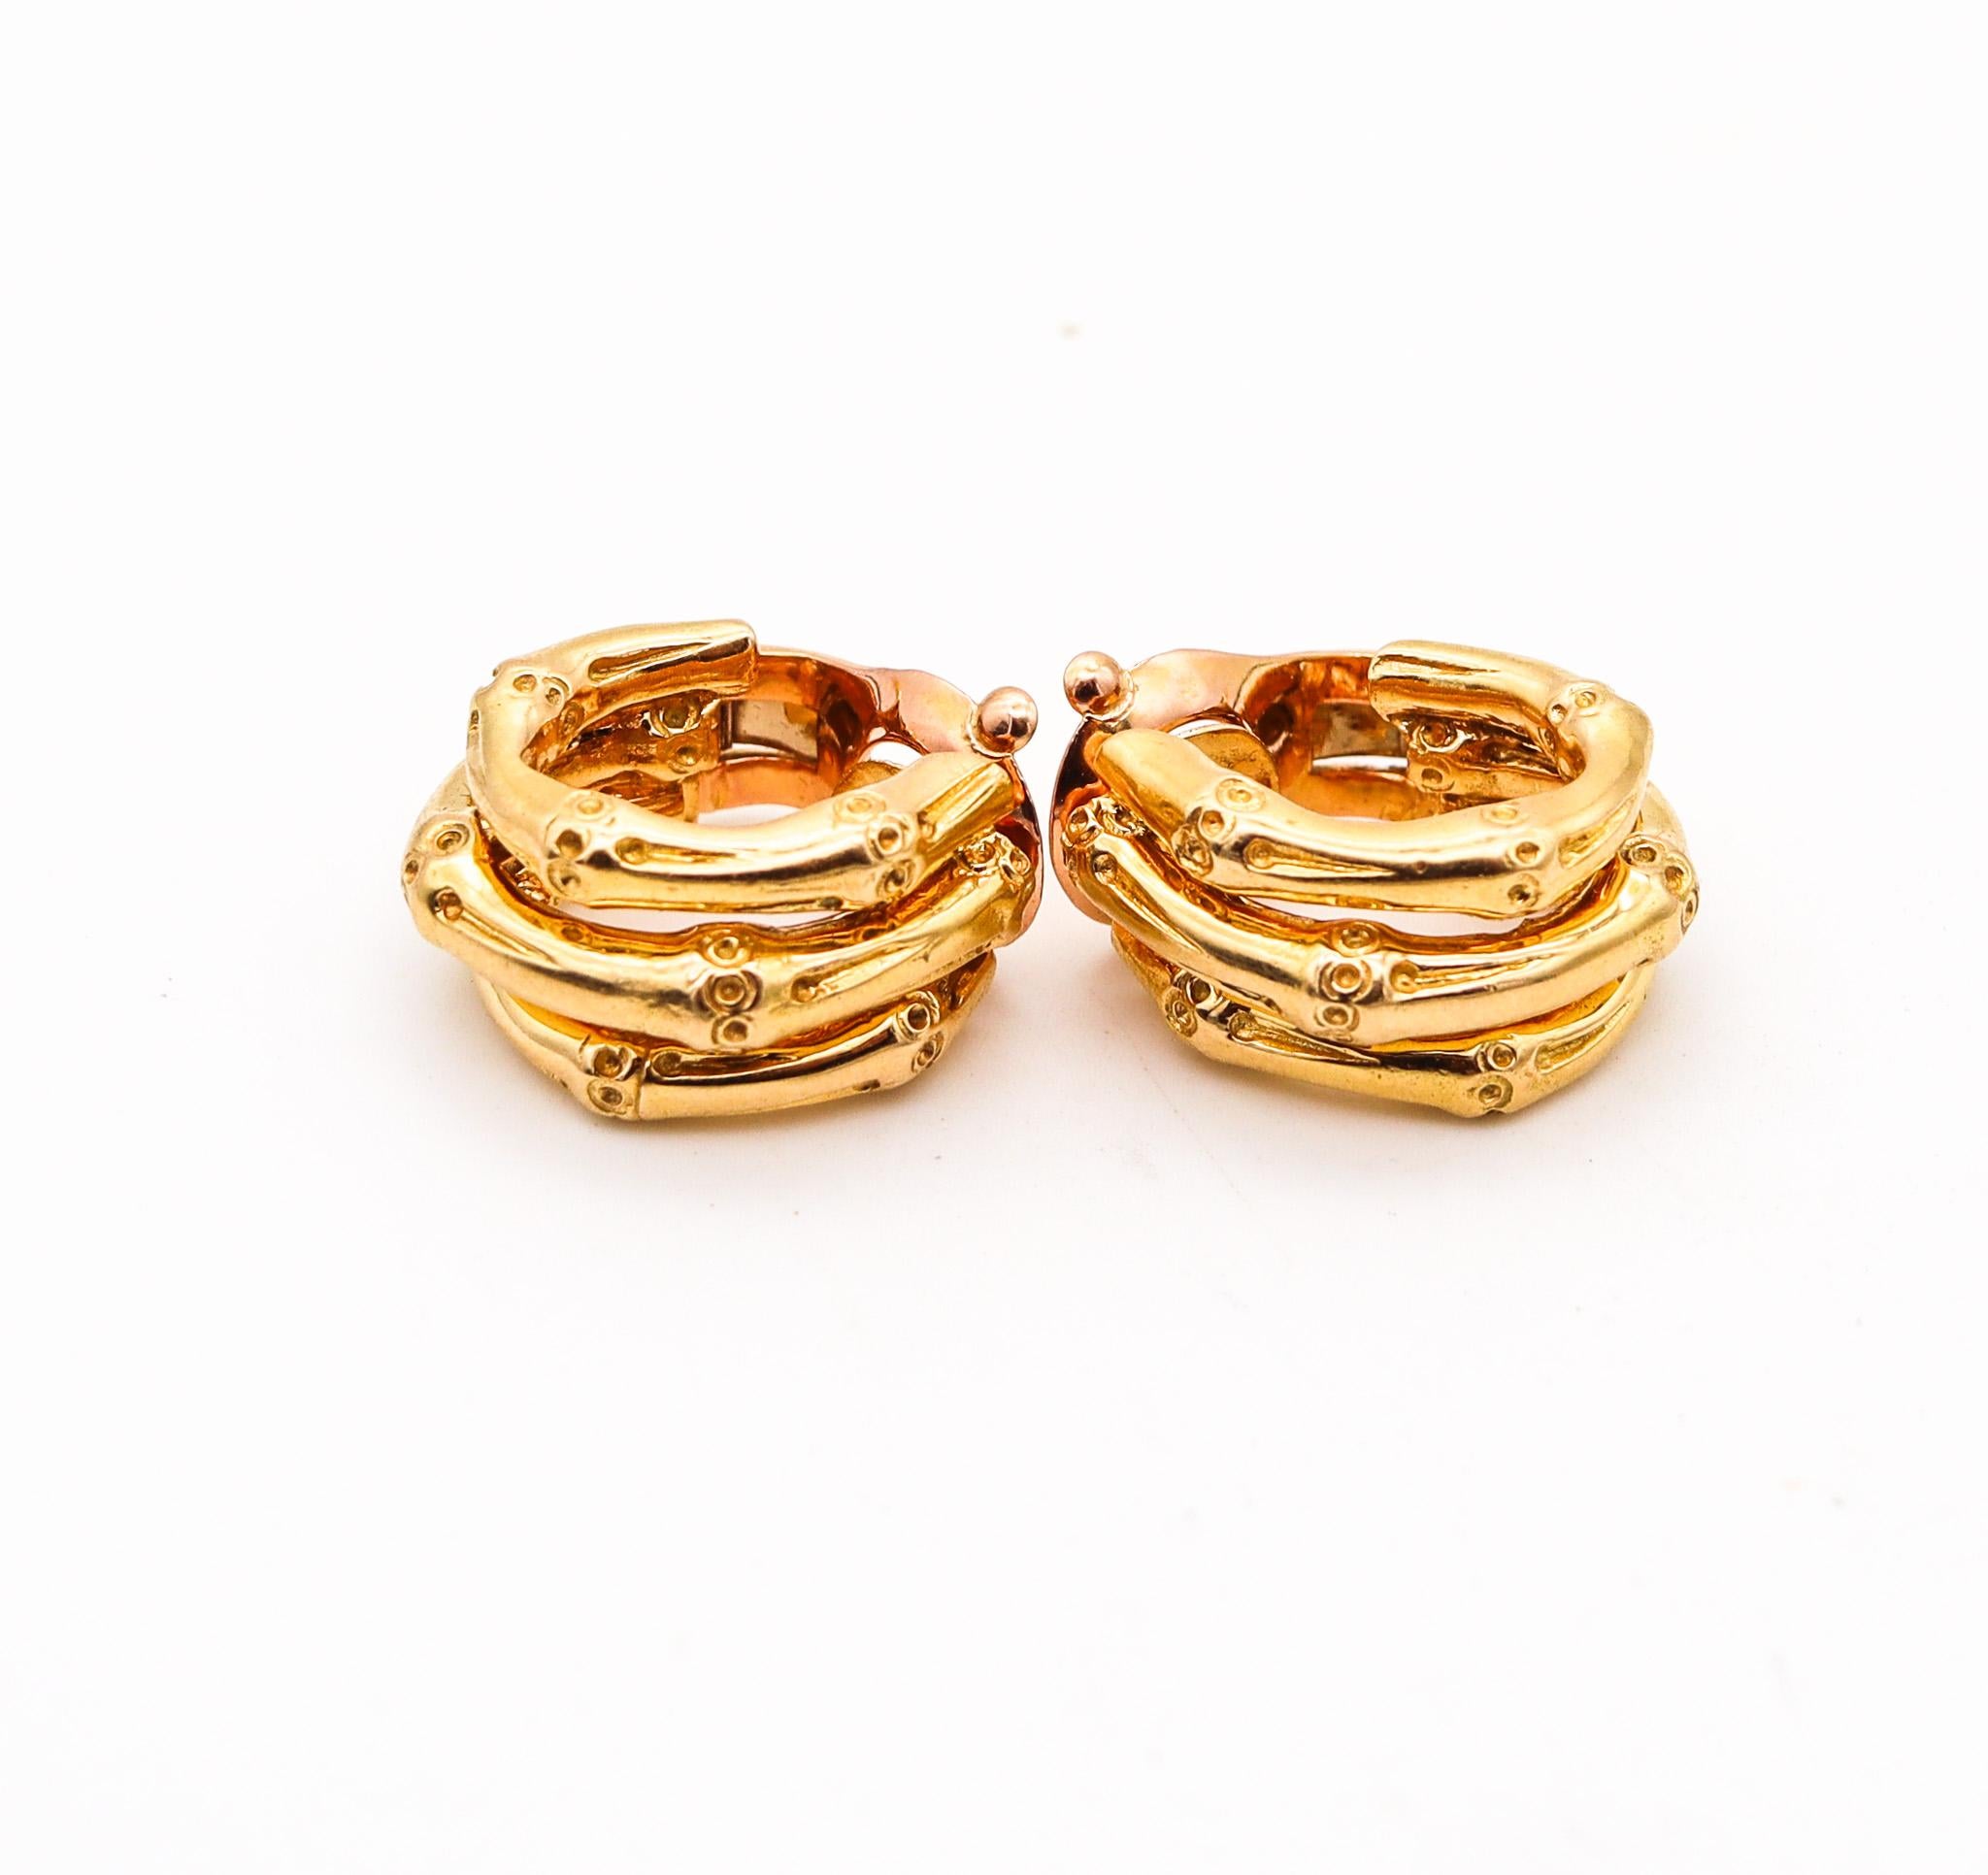 Hoops earrings designed by Van Cleef & Arpels.

Very rare vintage pair of clips-on earrings, created in Paris France by the jewelry house of Van Cleef & Arpels, back in the 1967. They were made at the jewelry atelier of Andre Vassort. The pair has